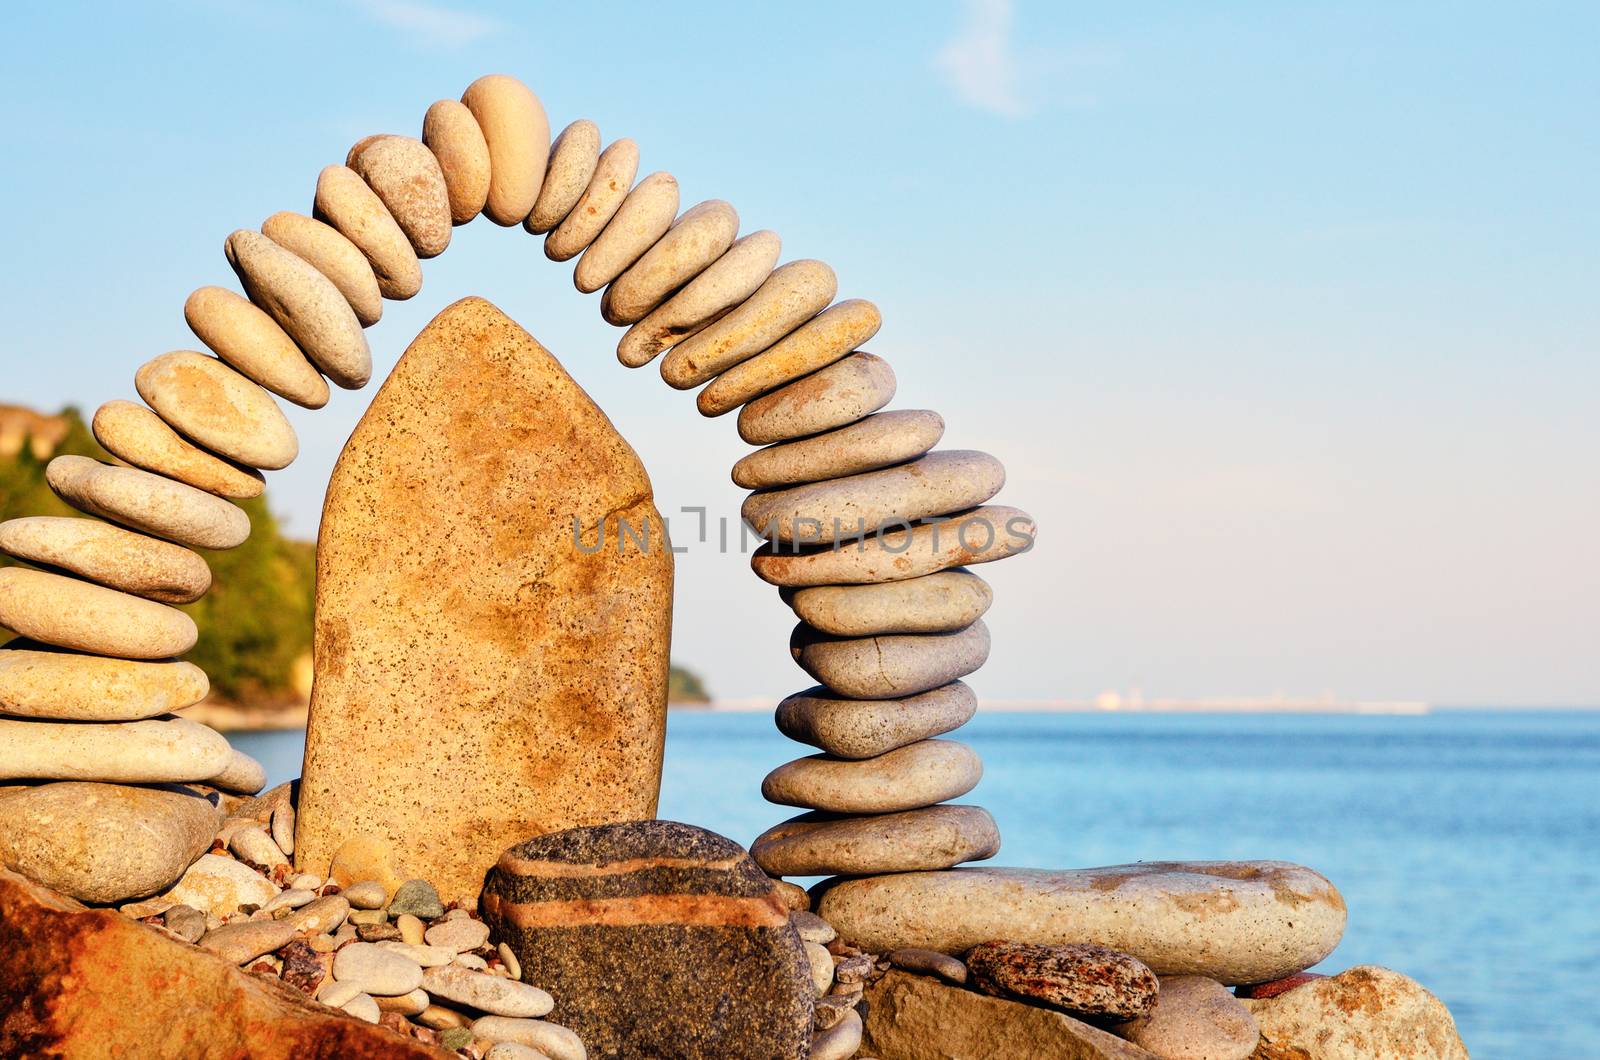 Stones laid out in the form of a arch on the sea coast